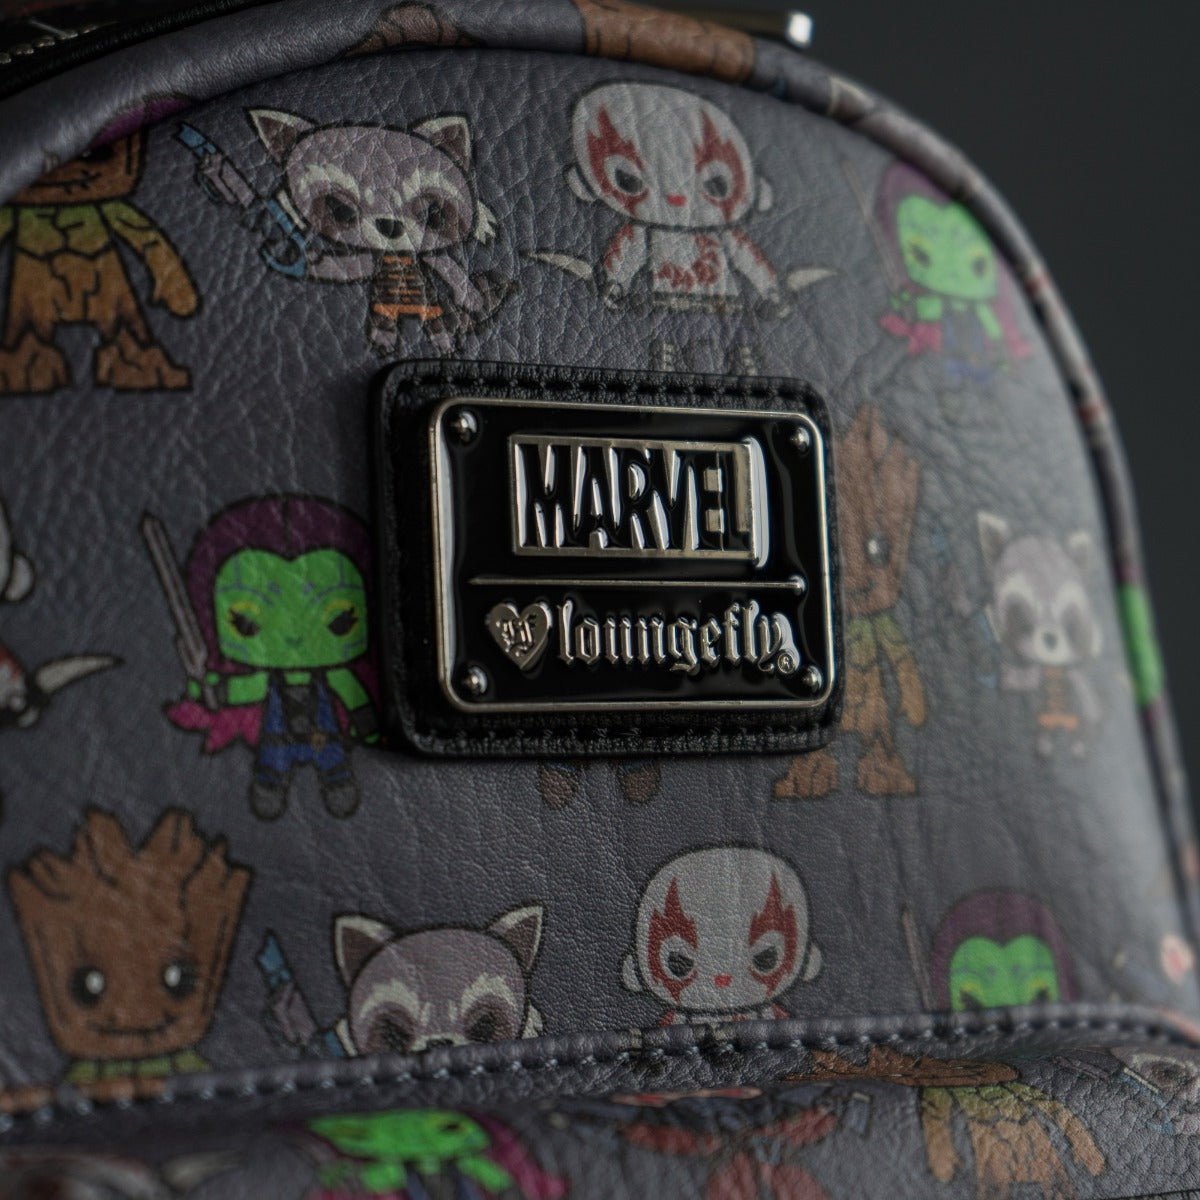 Loungefly x Marvel Guardians of the Galaxy Kawaii Character Mini Backpack - GeekCore